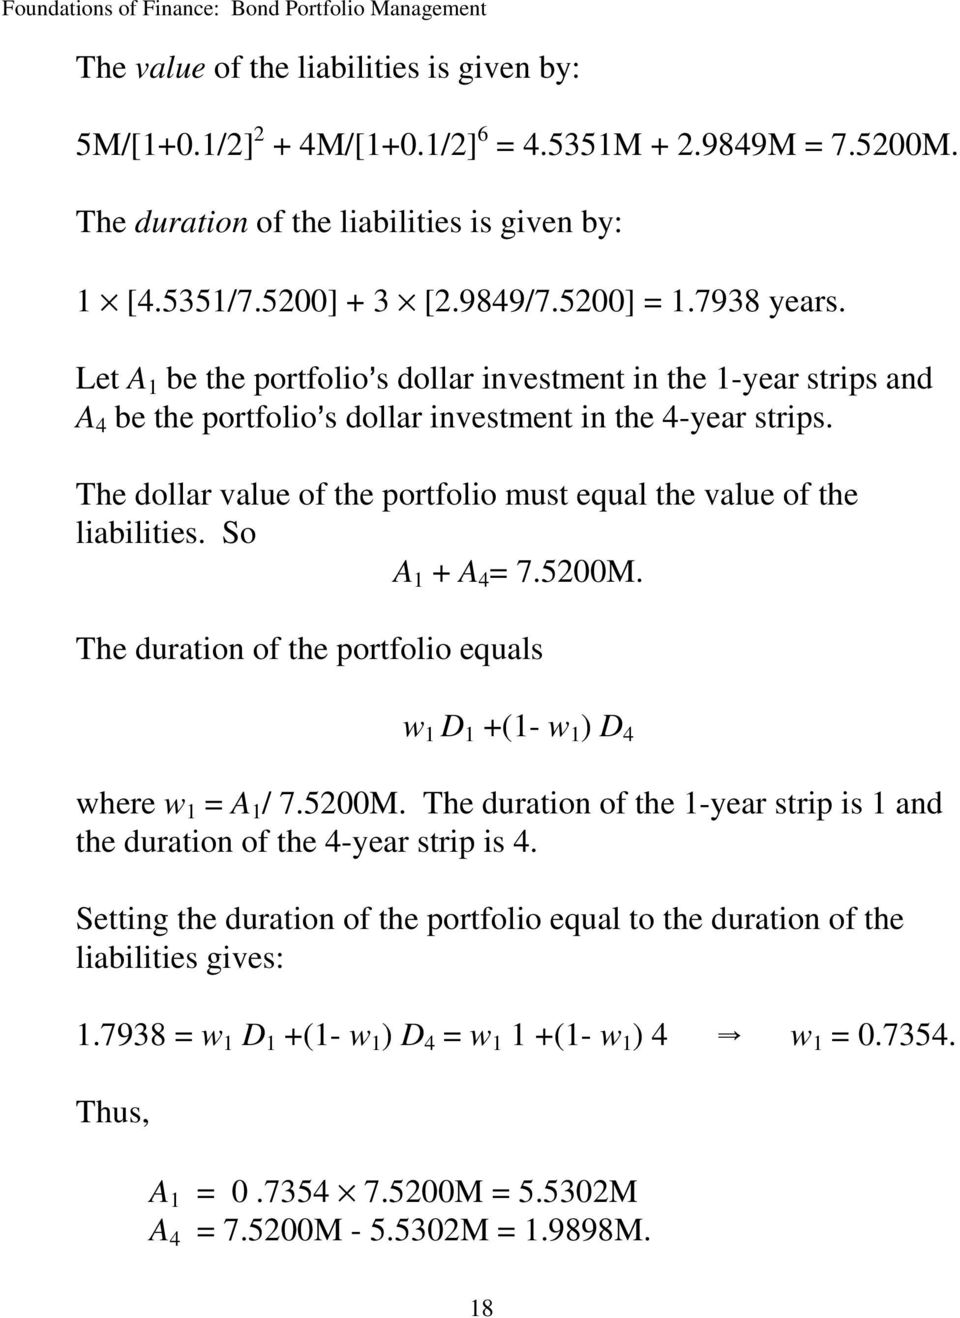 The dollar value of the portfolio must equal the value of the liabilities. So A 1 + A 4 = 7.5200M. The duration of the portfolio equals w 1 D 1 +(1- w 1 ) D 4 where w 1 = A 1 / 7.5200M. The duration of the 1-year strip is 1 and the duration of the 4-year strip is 4.